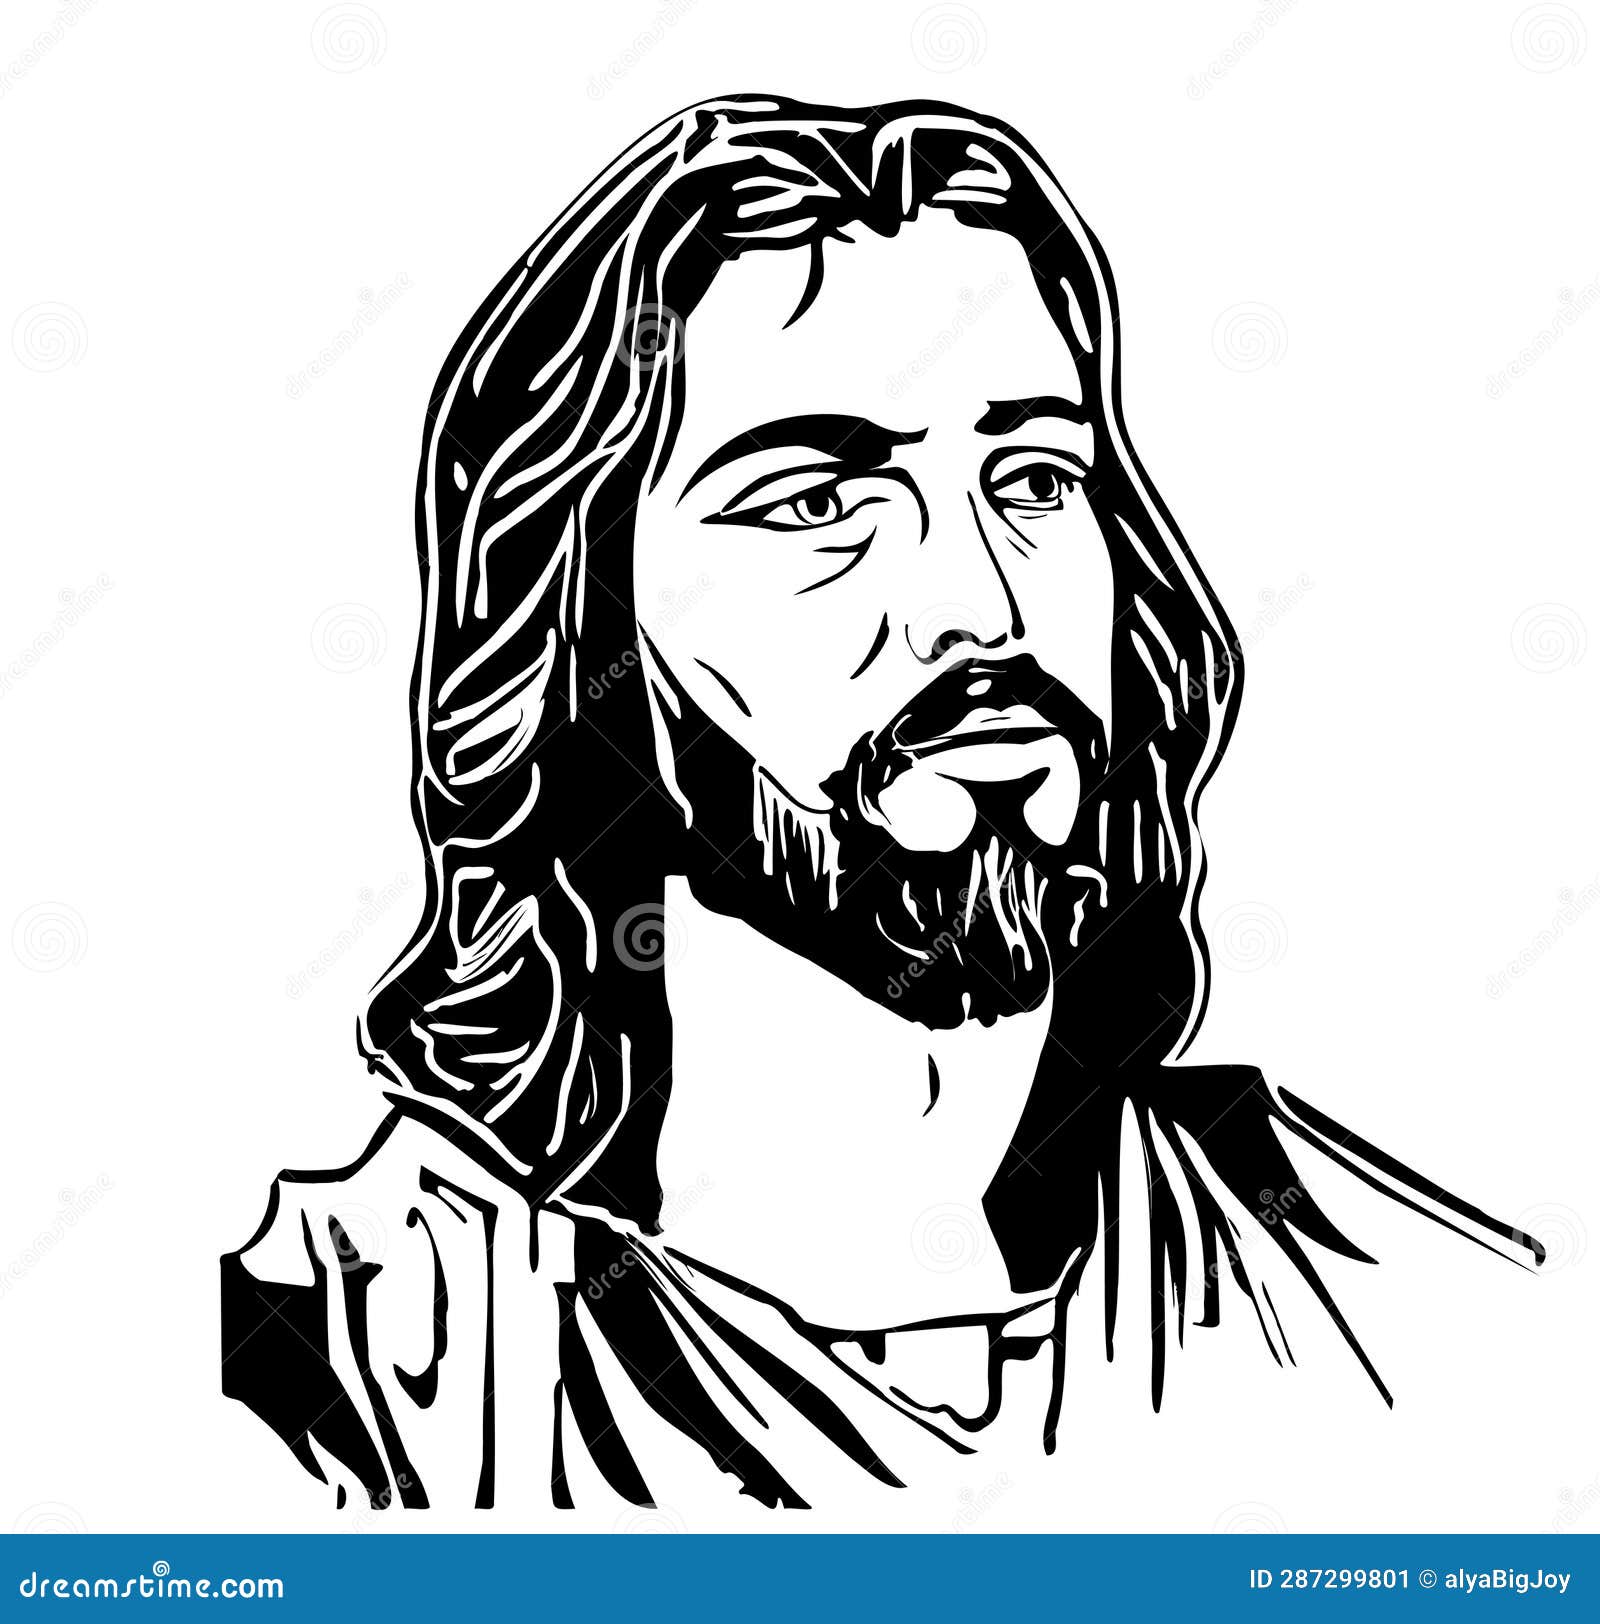 Face of Jesus Abstract Sketch Hand Drawn in Doodle Style Vector ...